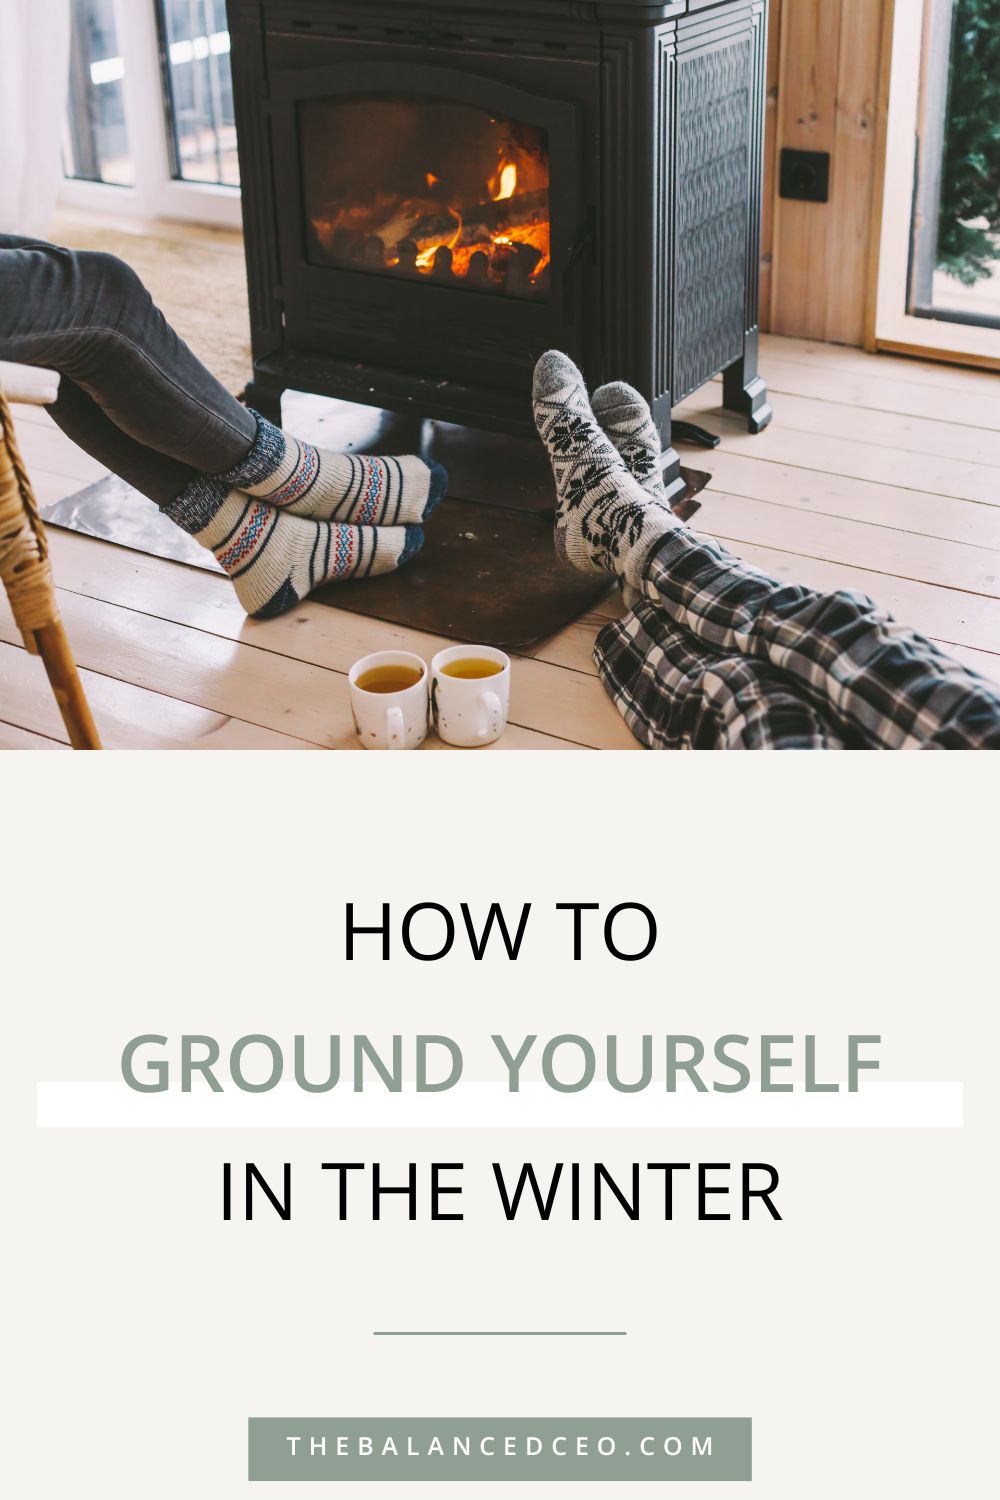 How to Ground Yourself in the Winter